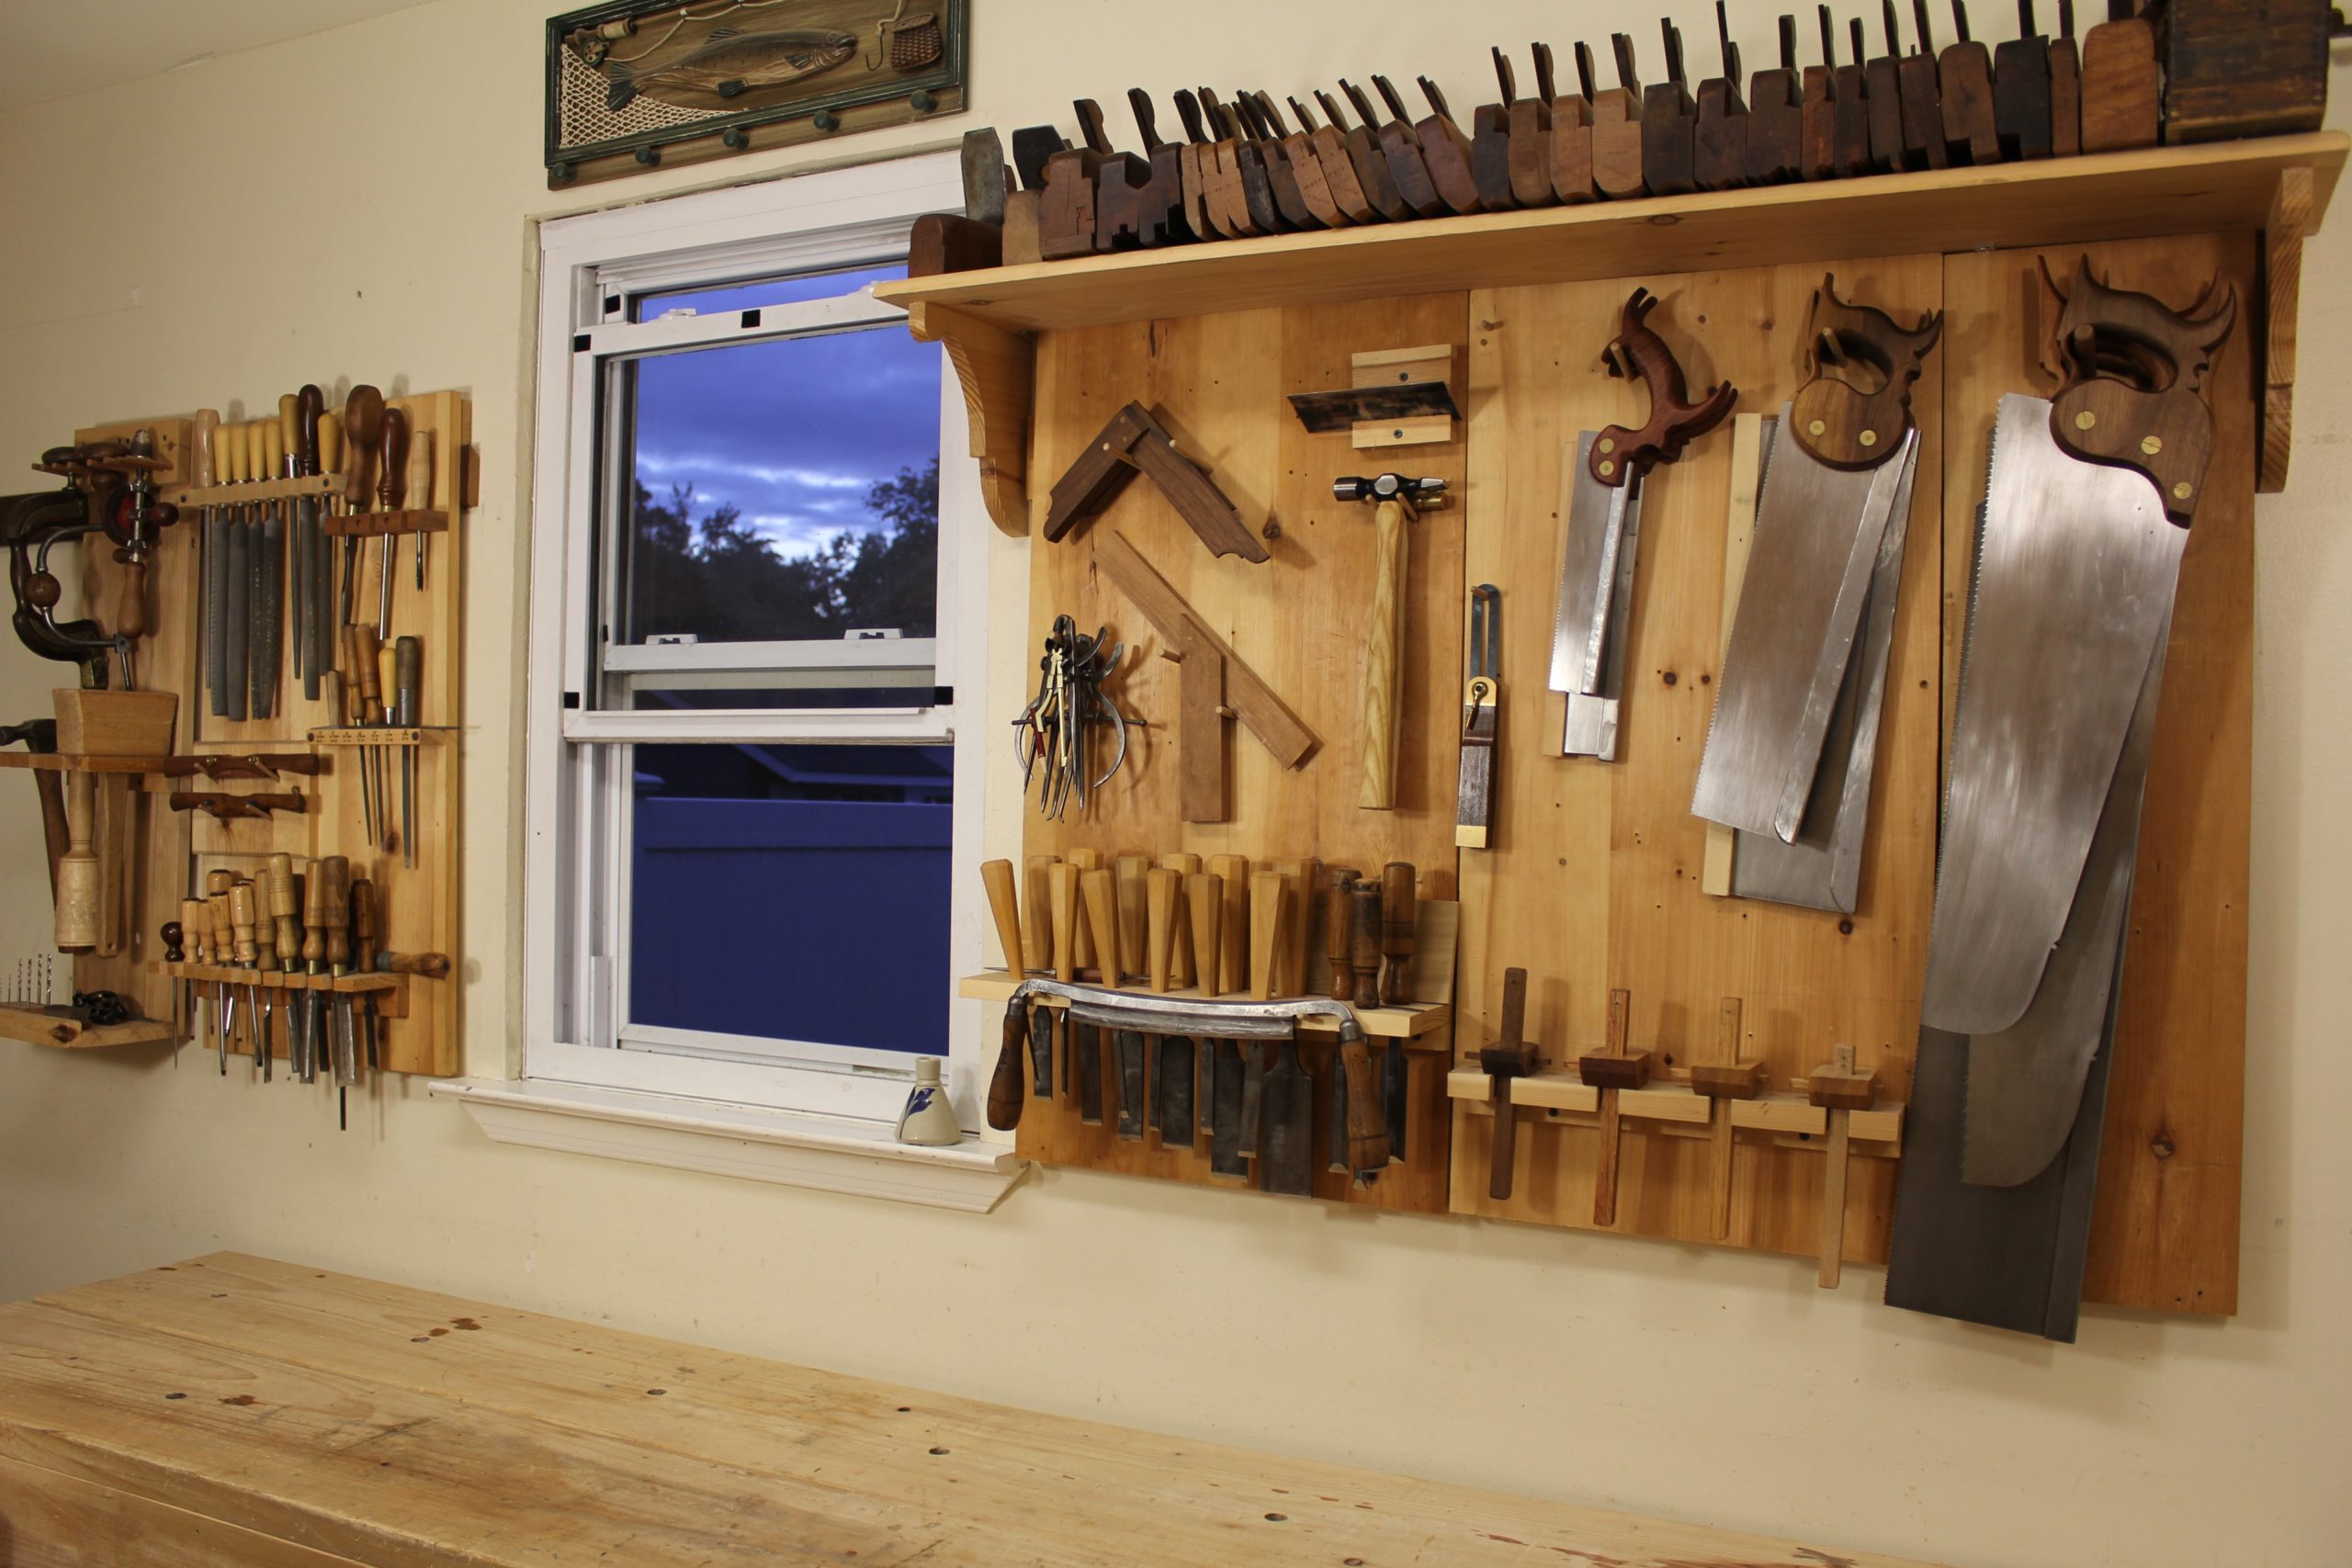 Storing Hand Tools on the Wall